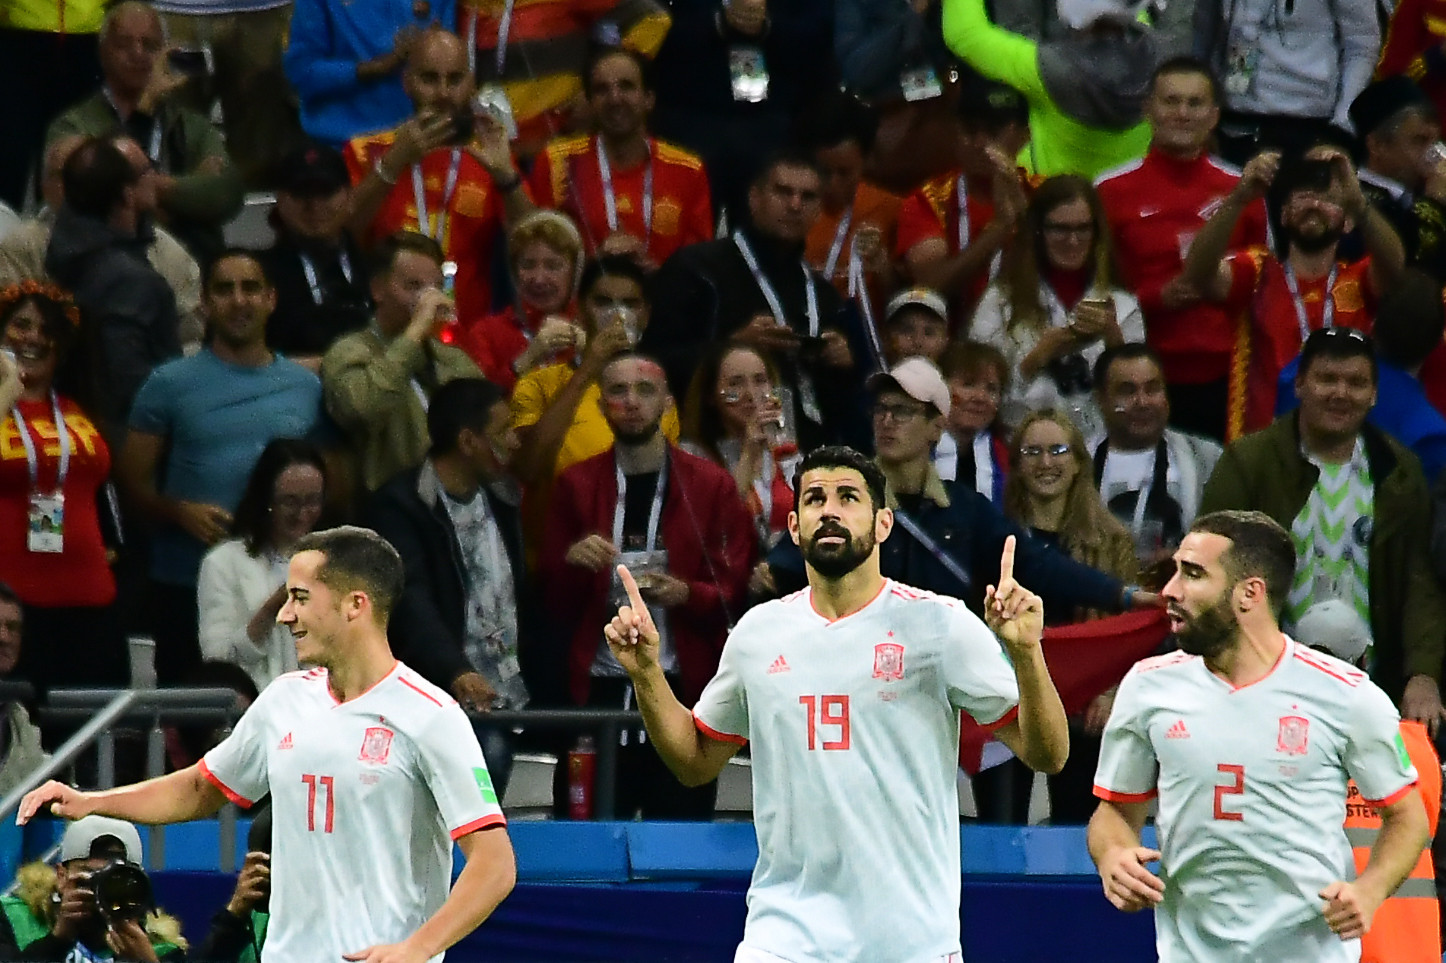 Diego Costa celebrates after scoring the winner for Spain against Iran ©Getty Images